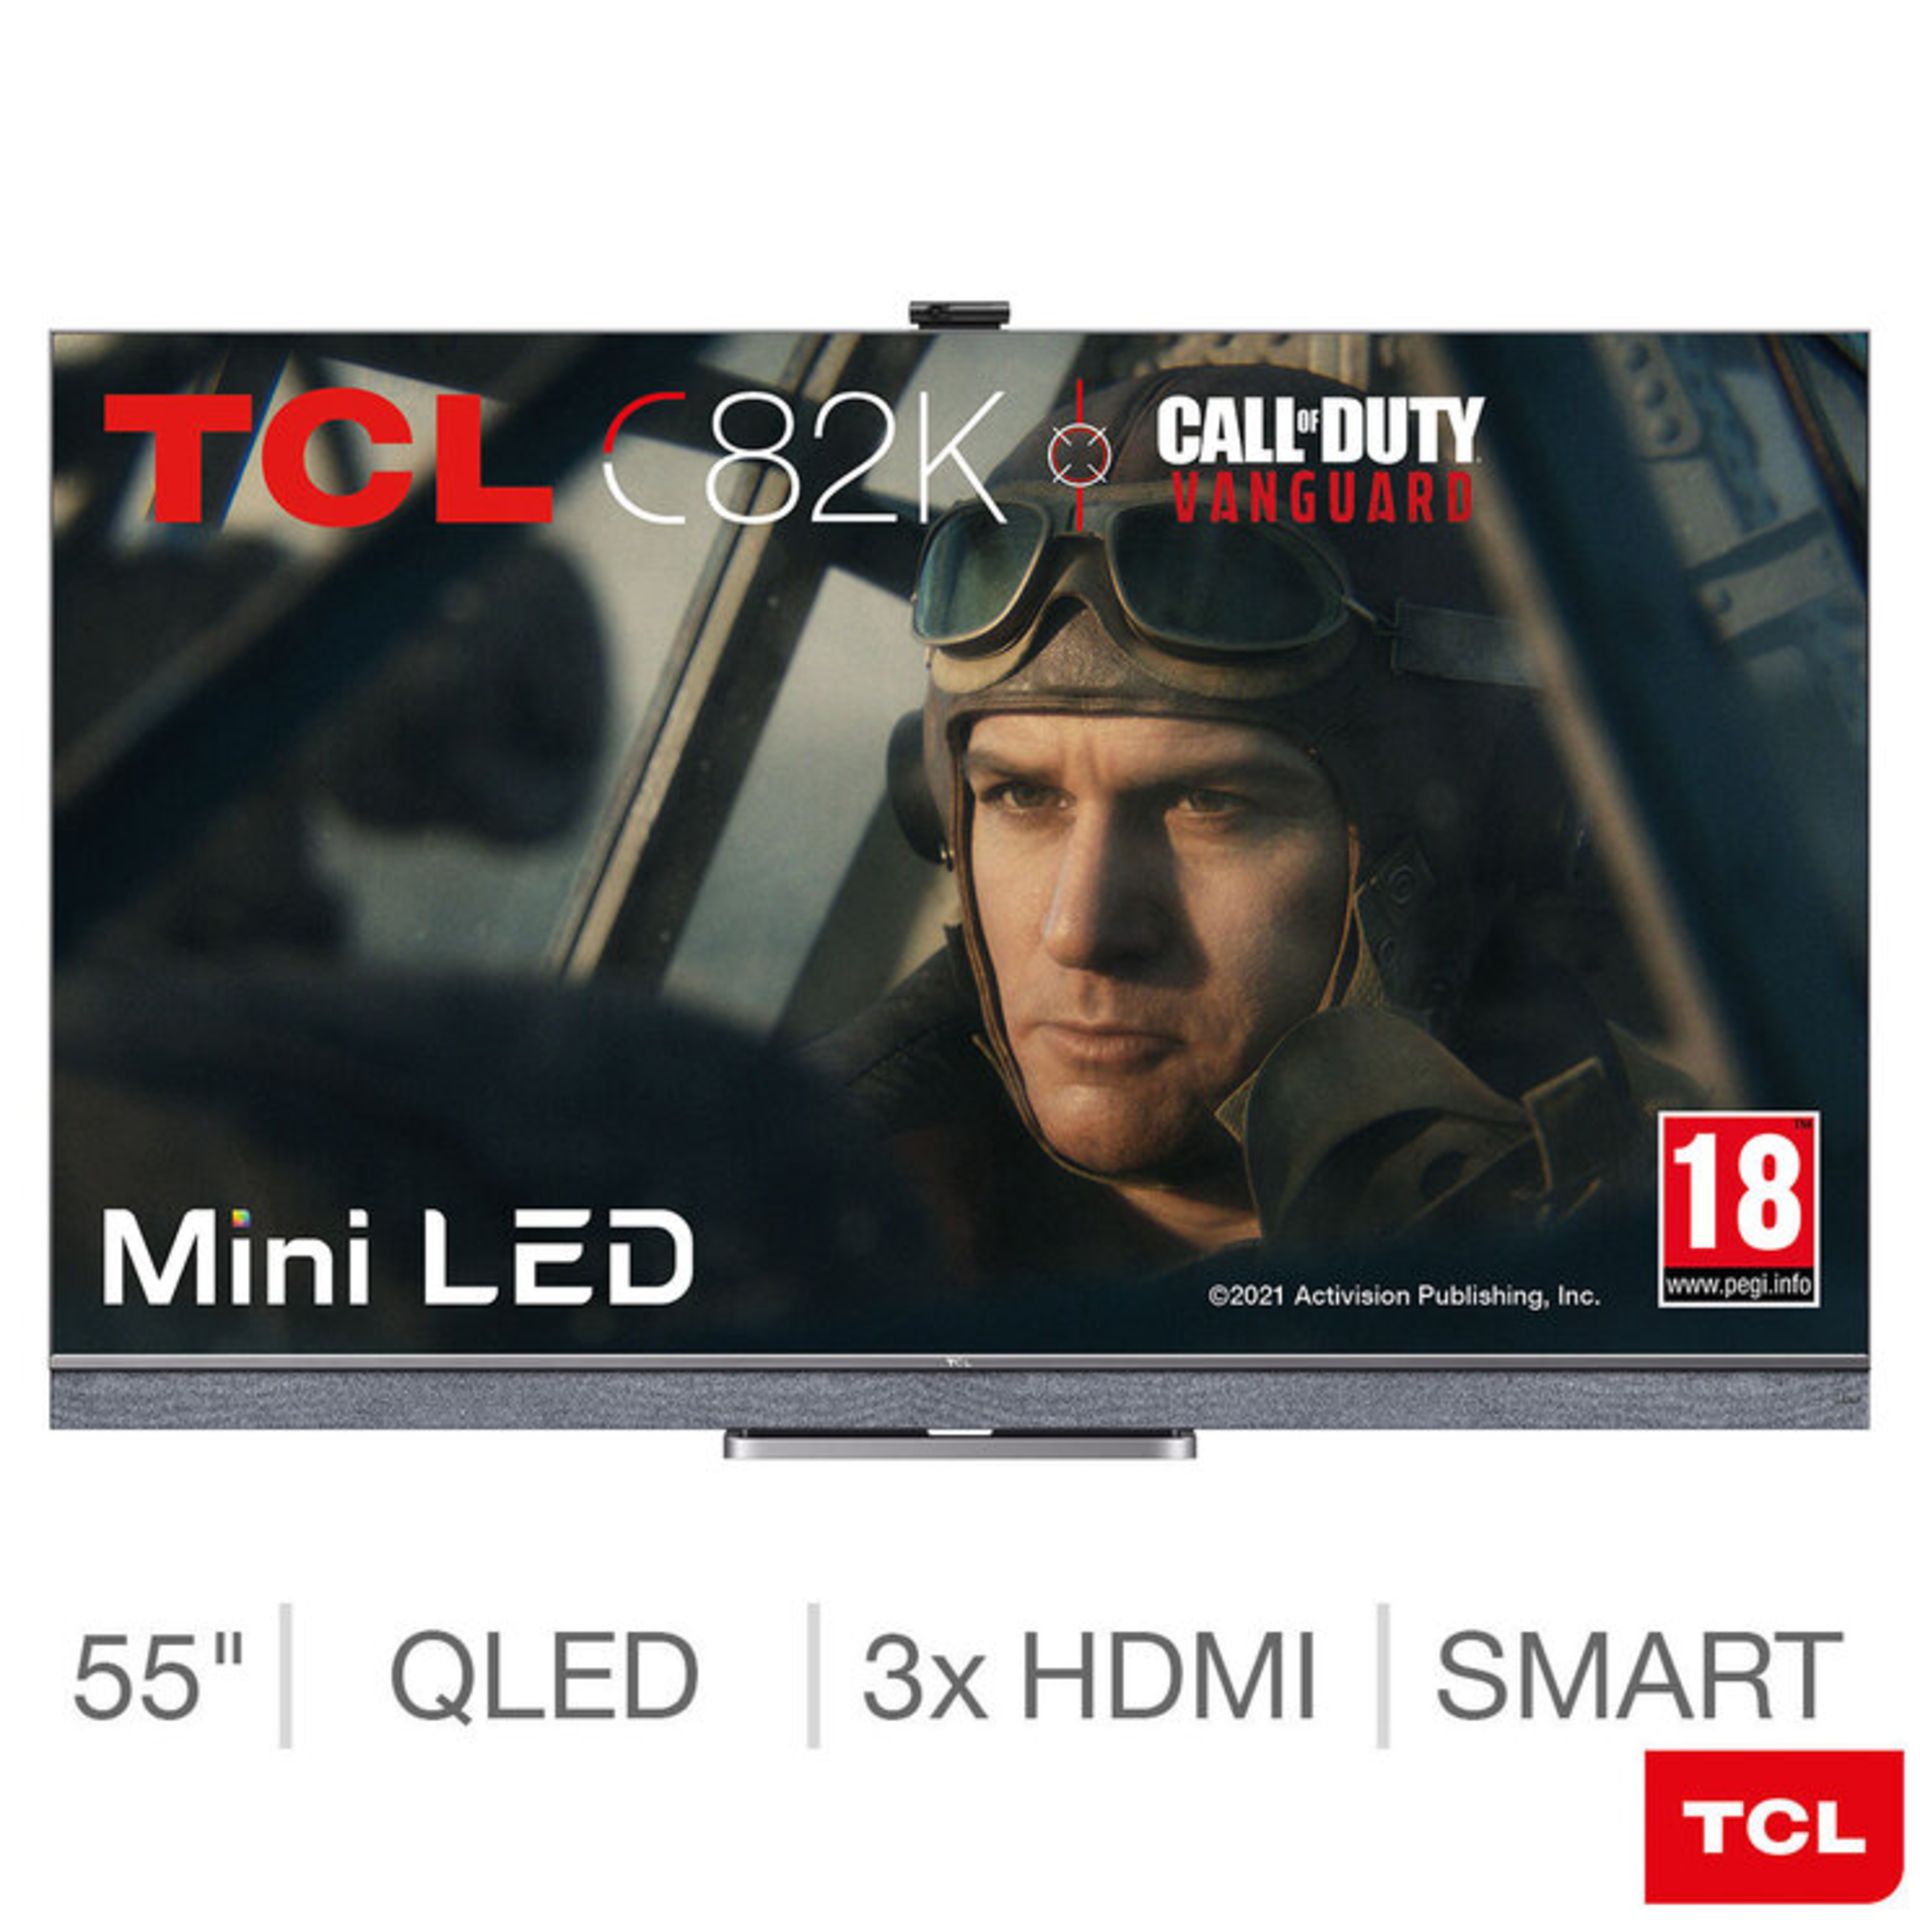 1 BOXED TCL 55C826K 55 INCH MINI LED QLED 4K ULTRA HD SMART ANDROID TV WITH REMOTE AND STAND RRP Â£